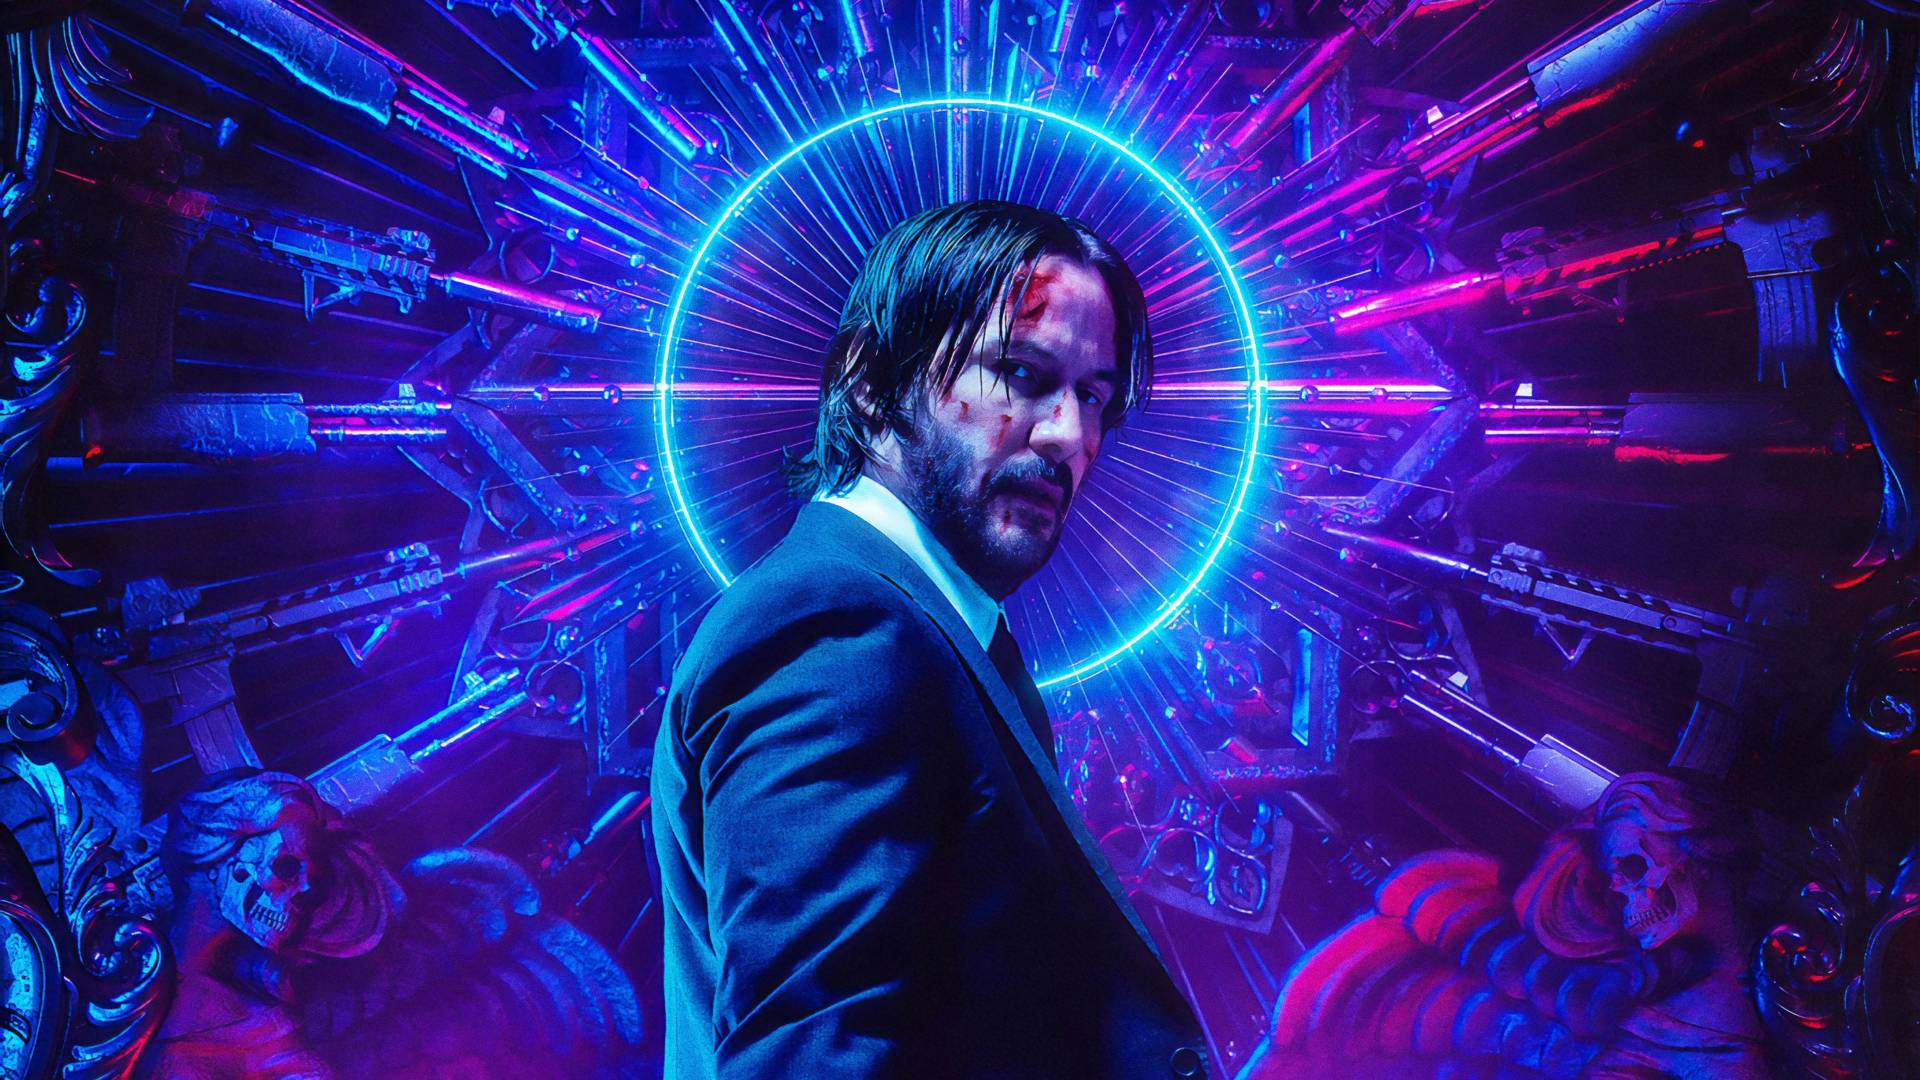 one-man-army-Keanu-Reeves-poster-luz-neon